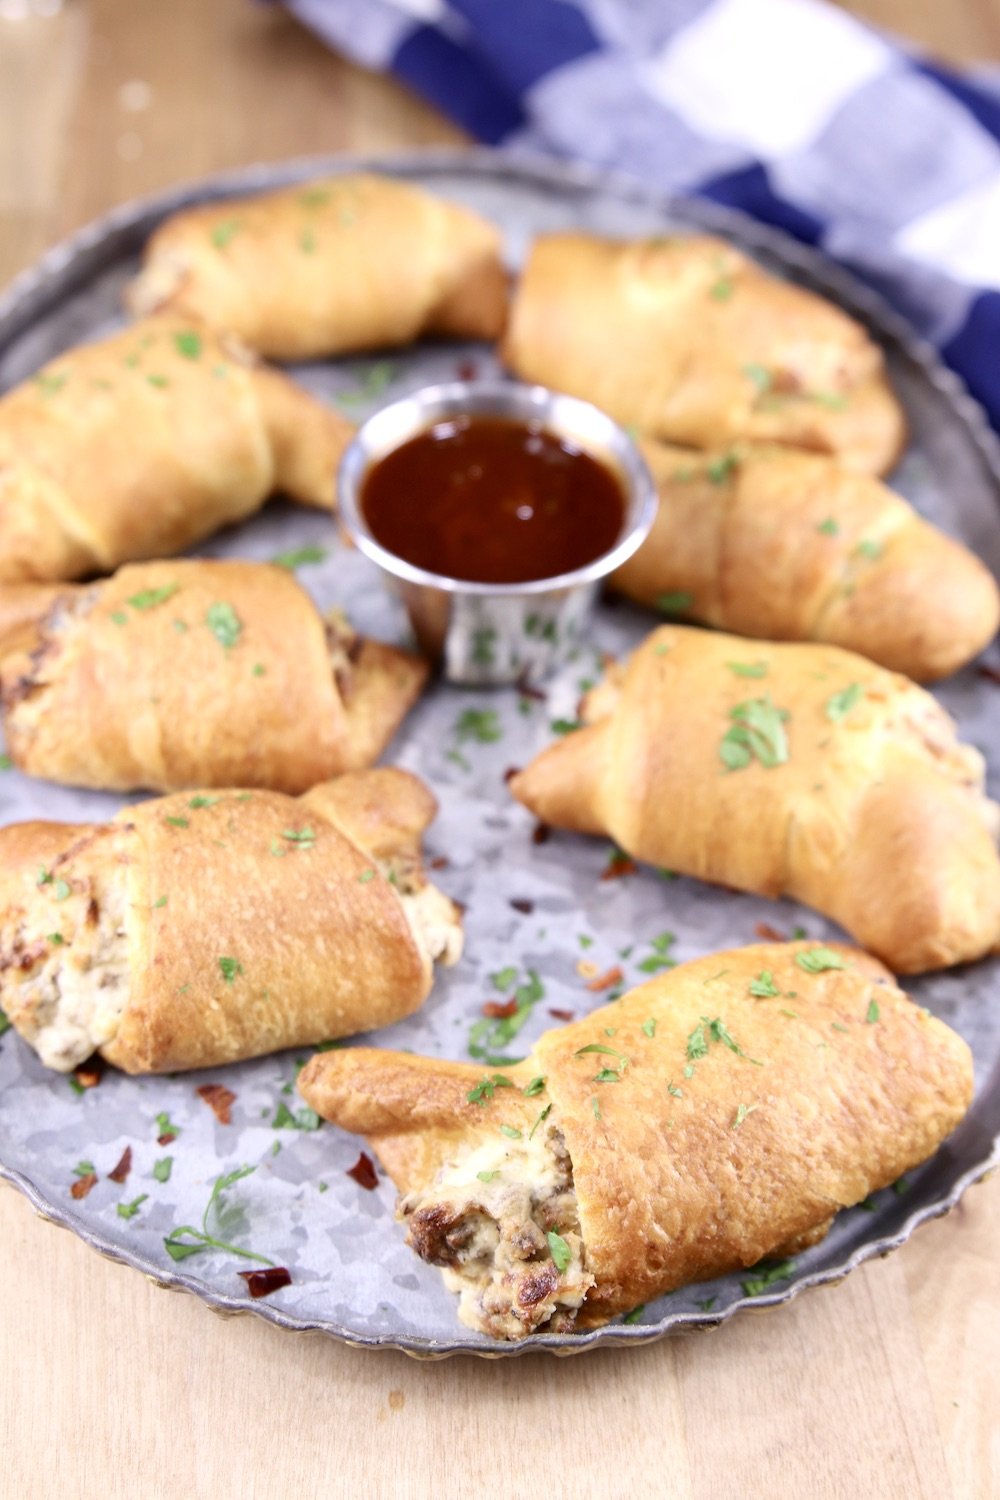 Platter of sausage filled crescents with bbq dipping sauce in center